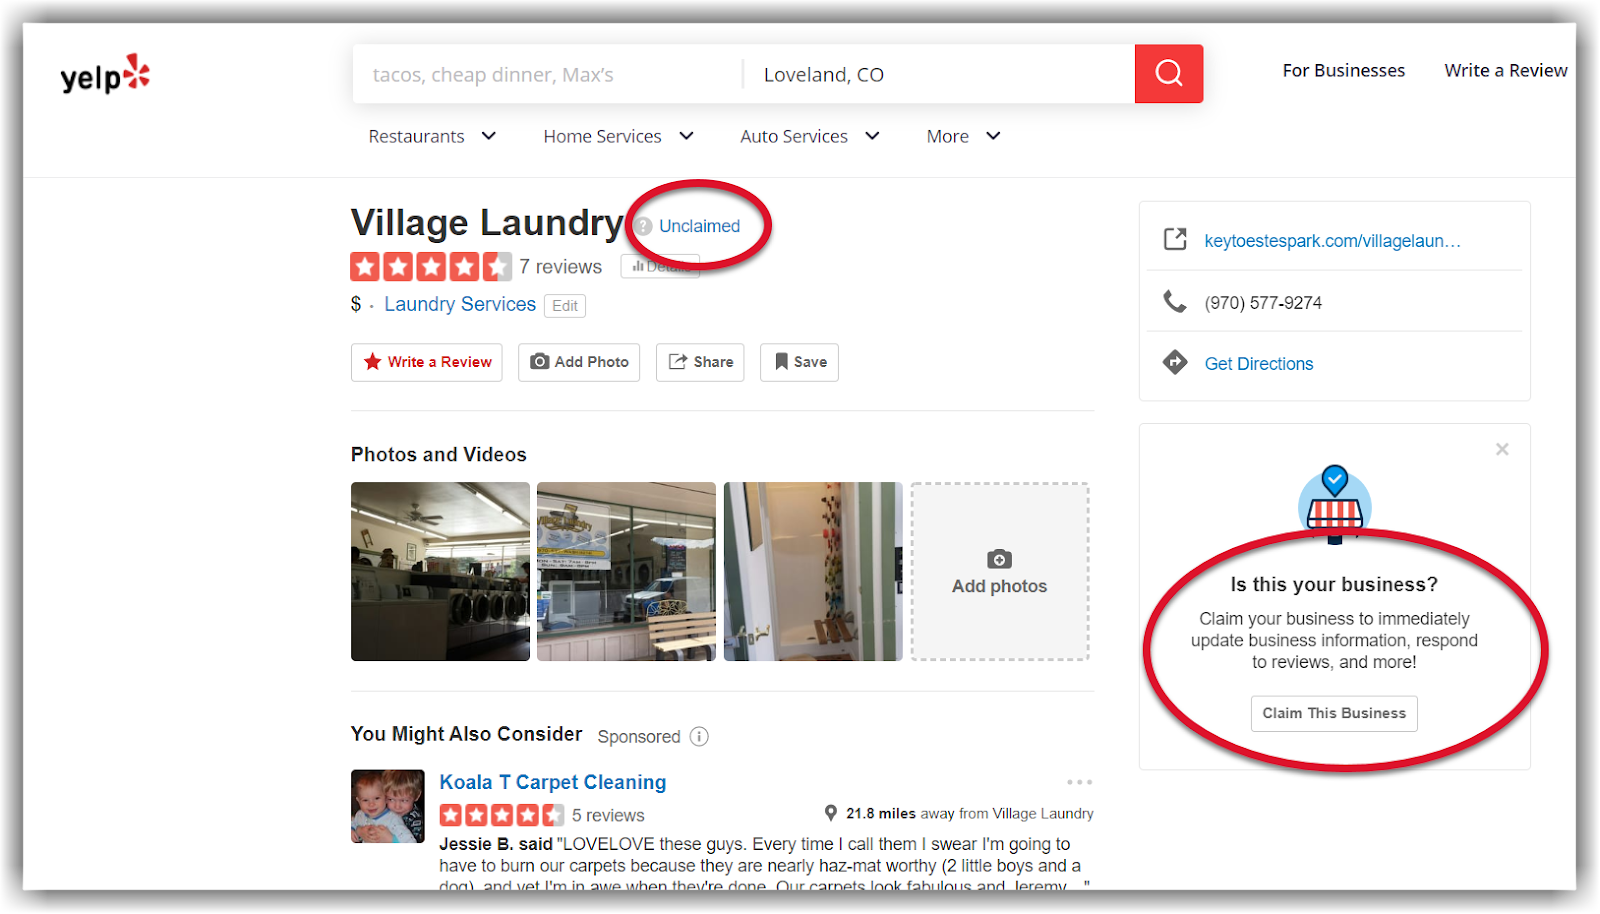 With Yelp, if your business is already listed, you can claim your business right in the existing listing